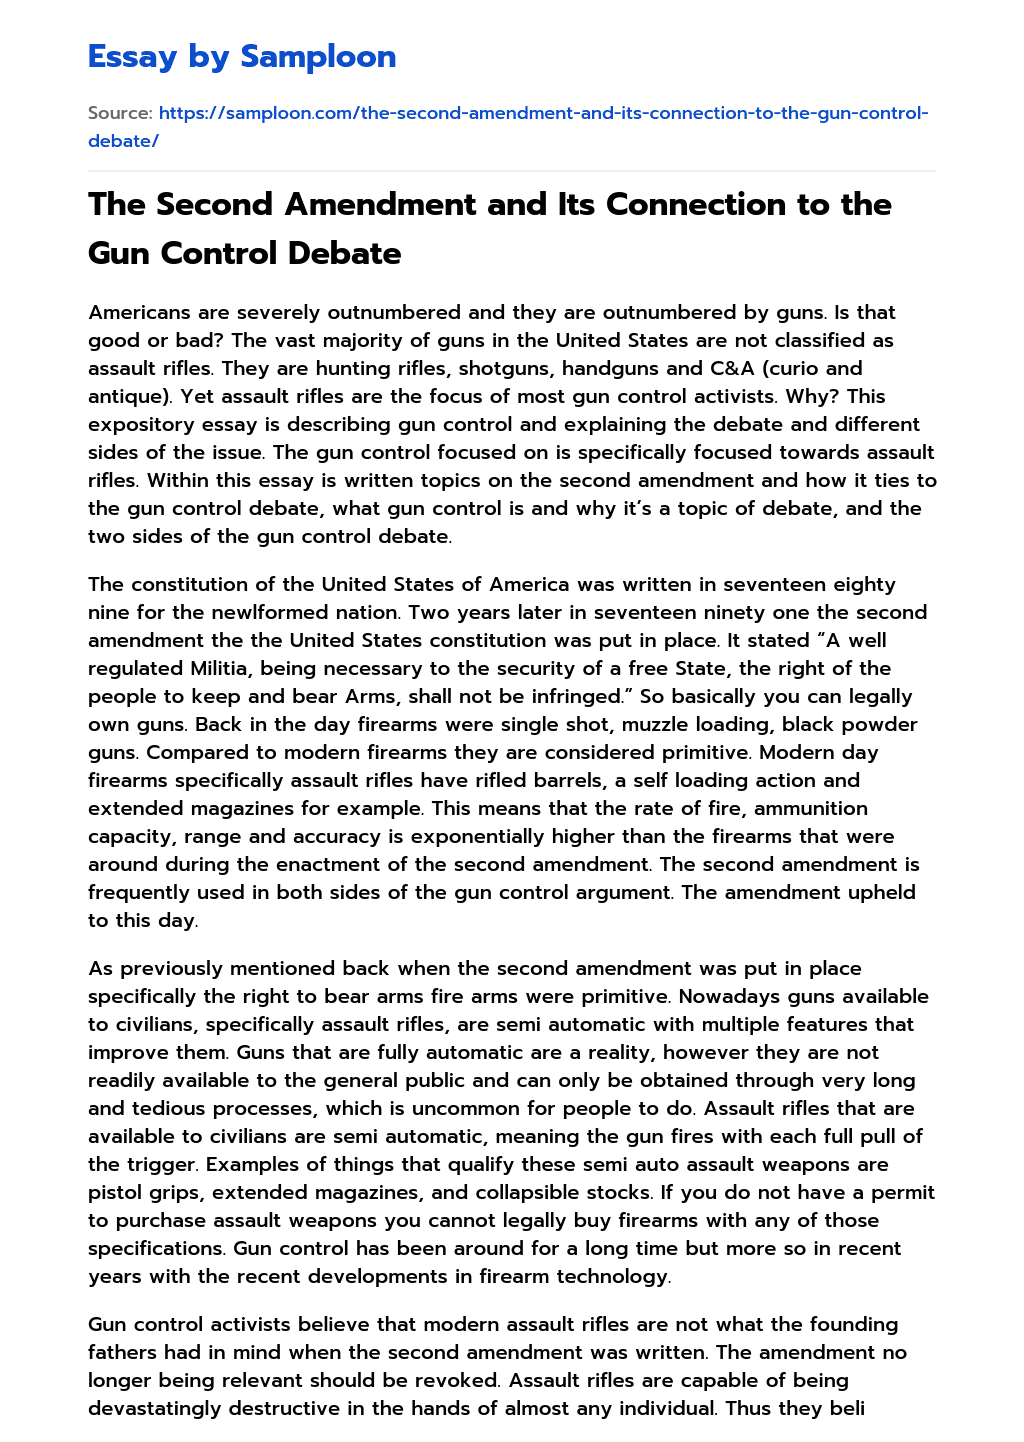 The Second Amendment and Its Connection to the Gun Control Debate essay